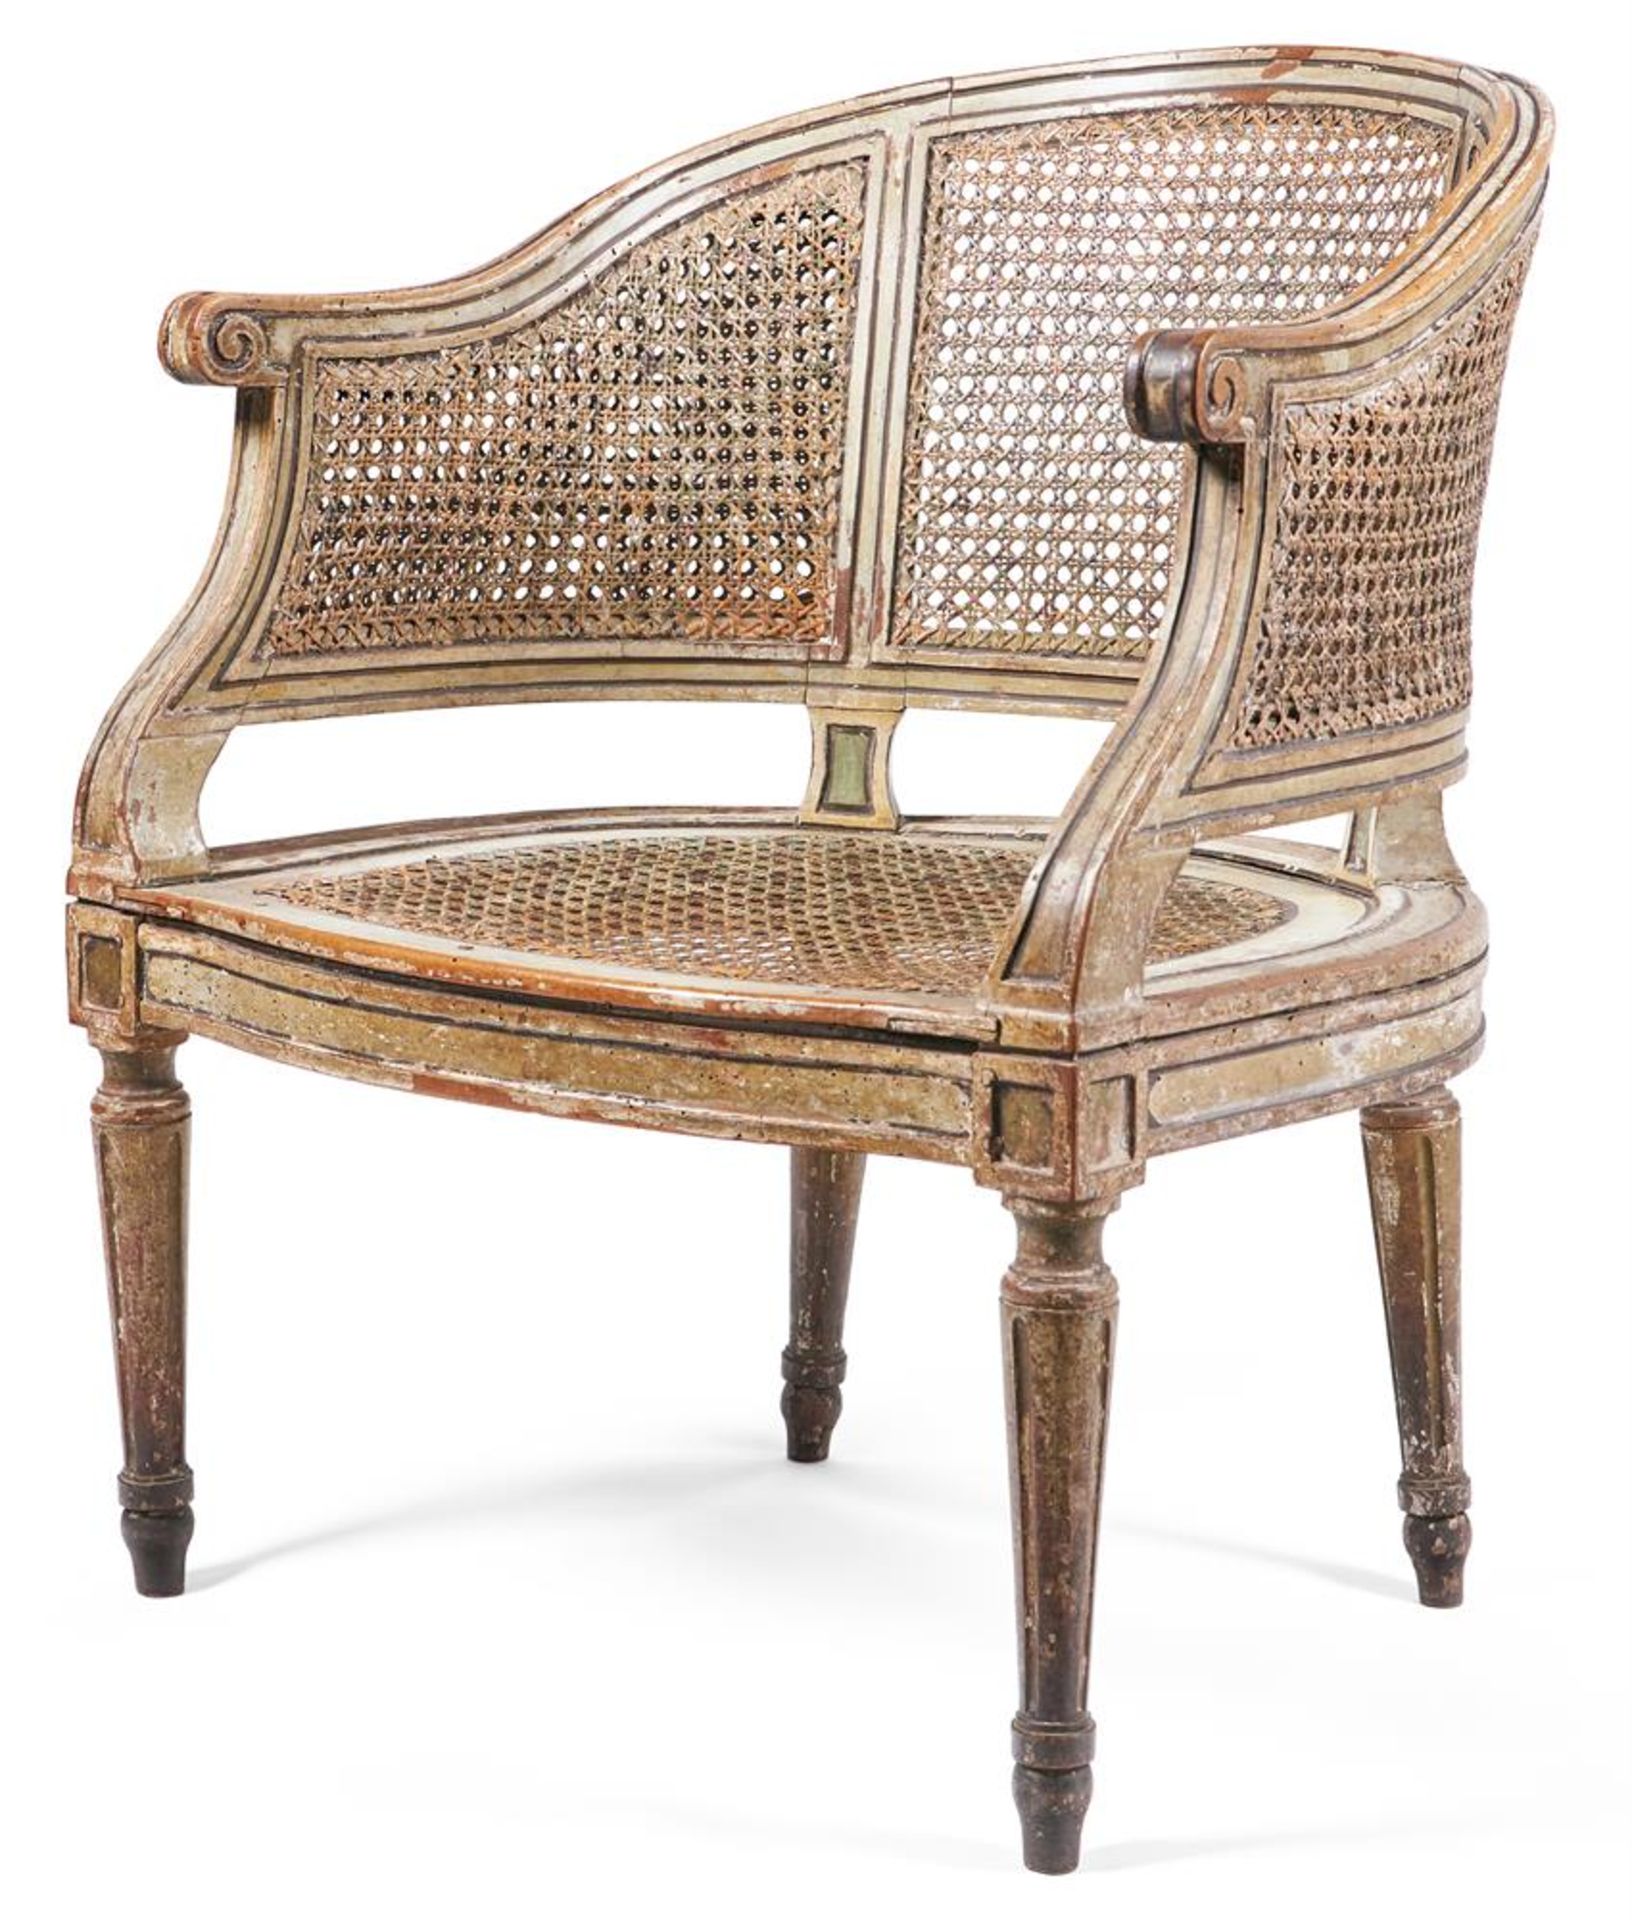 A LOUIS XVI PAINTED WALNUT BERGERE ARMCHAIR, LATE 18TH CENTURY - Image 3 of 6